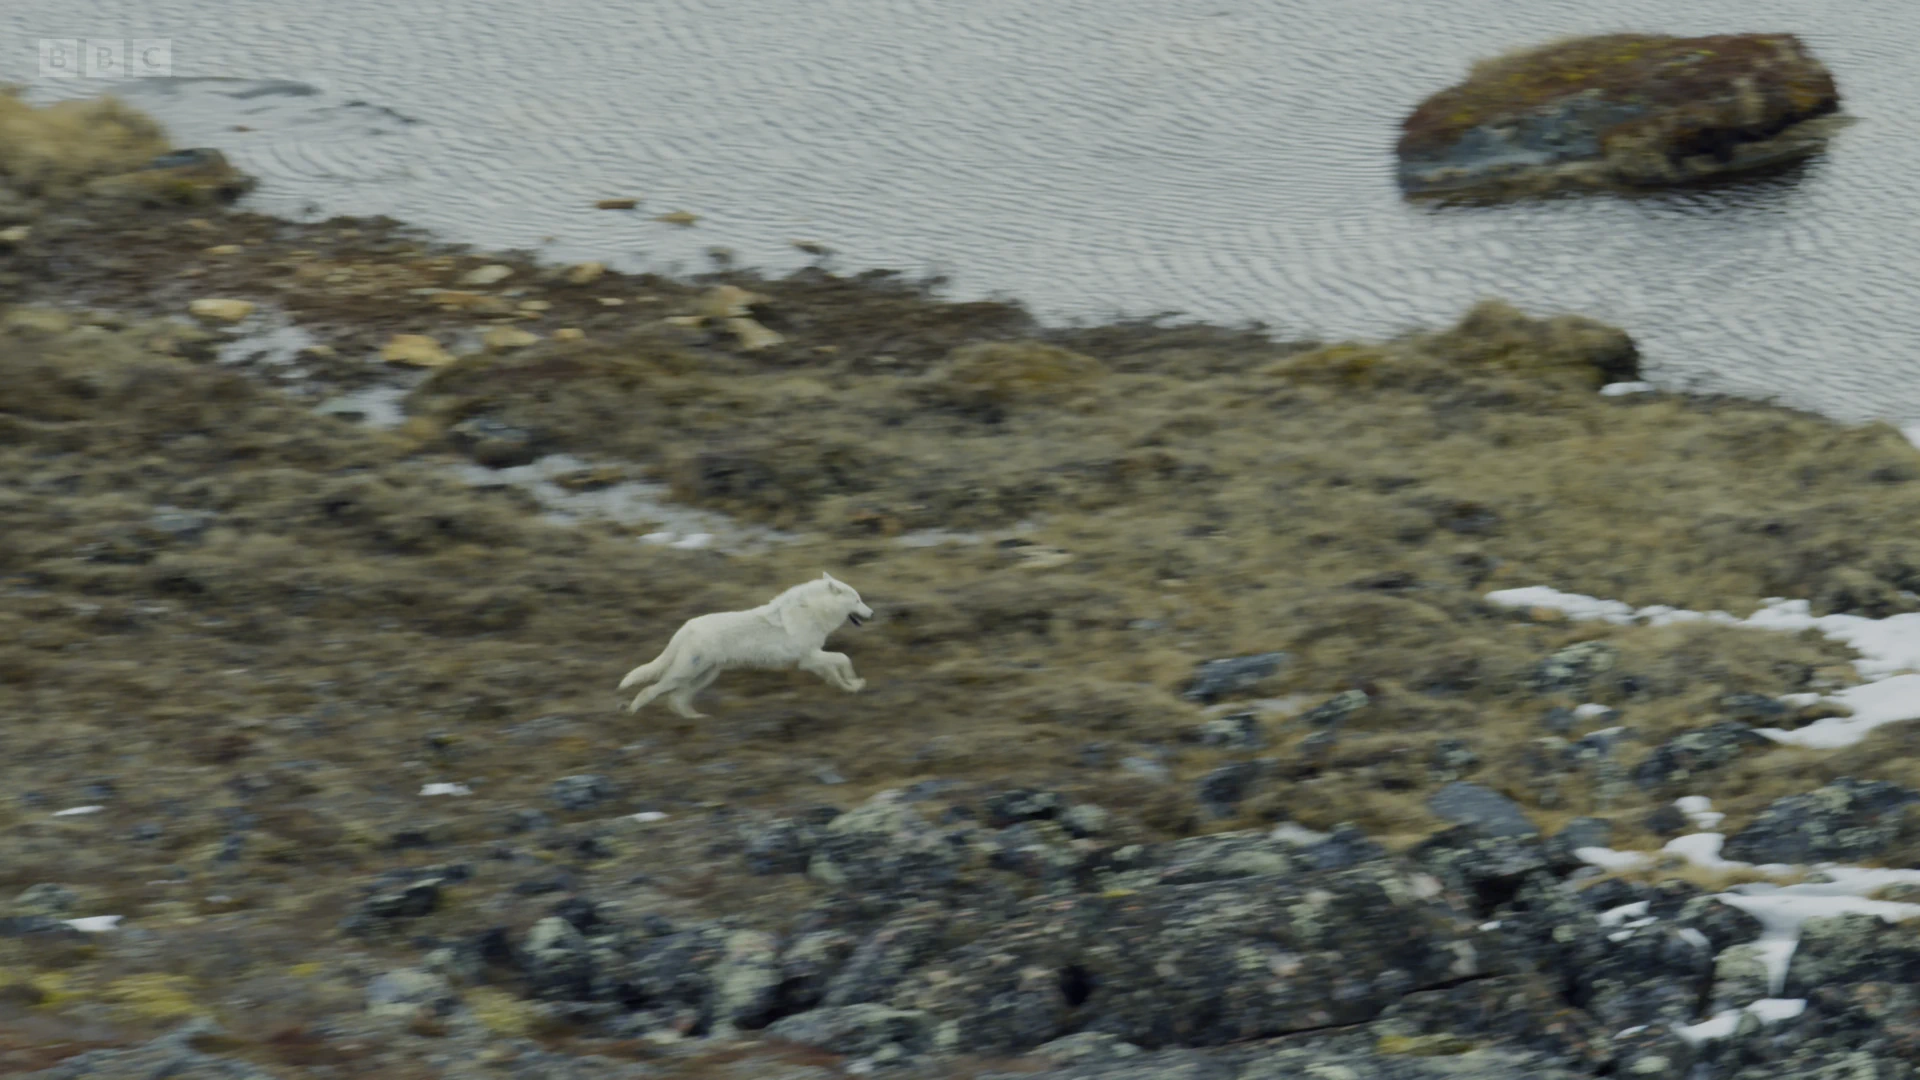 Arctic wolf (Canis lupus arctos) as shown in Planet Earth II - Grasslands